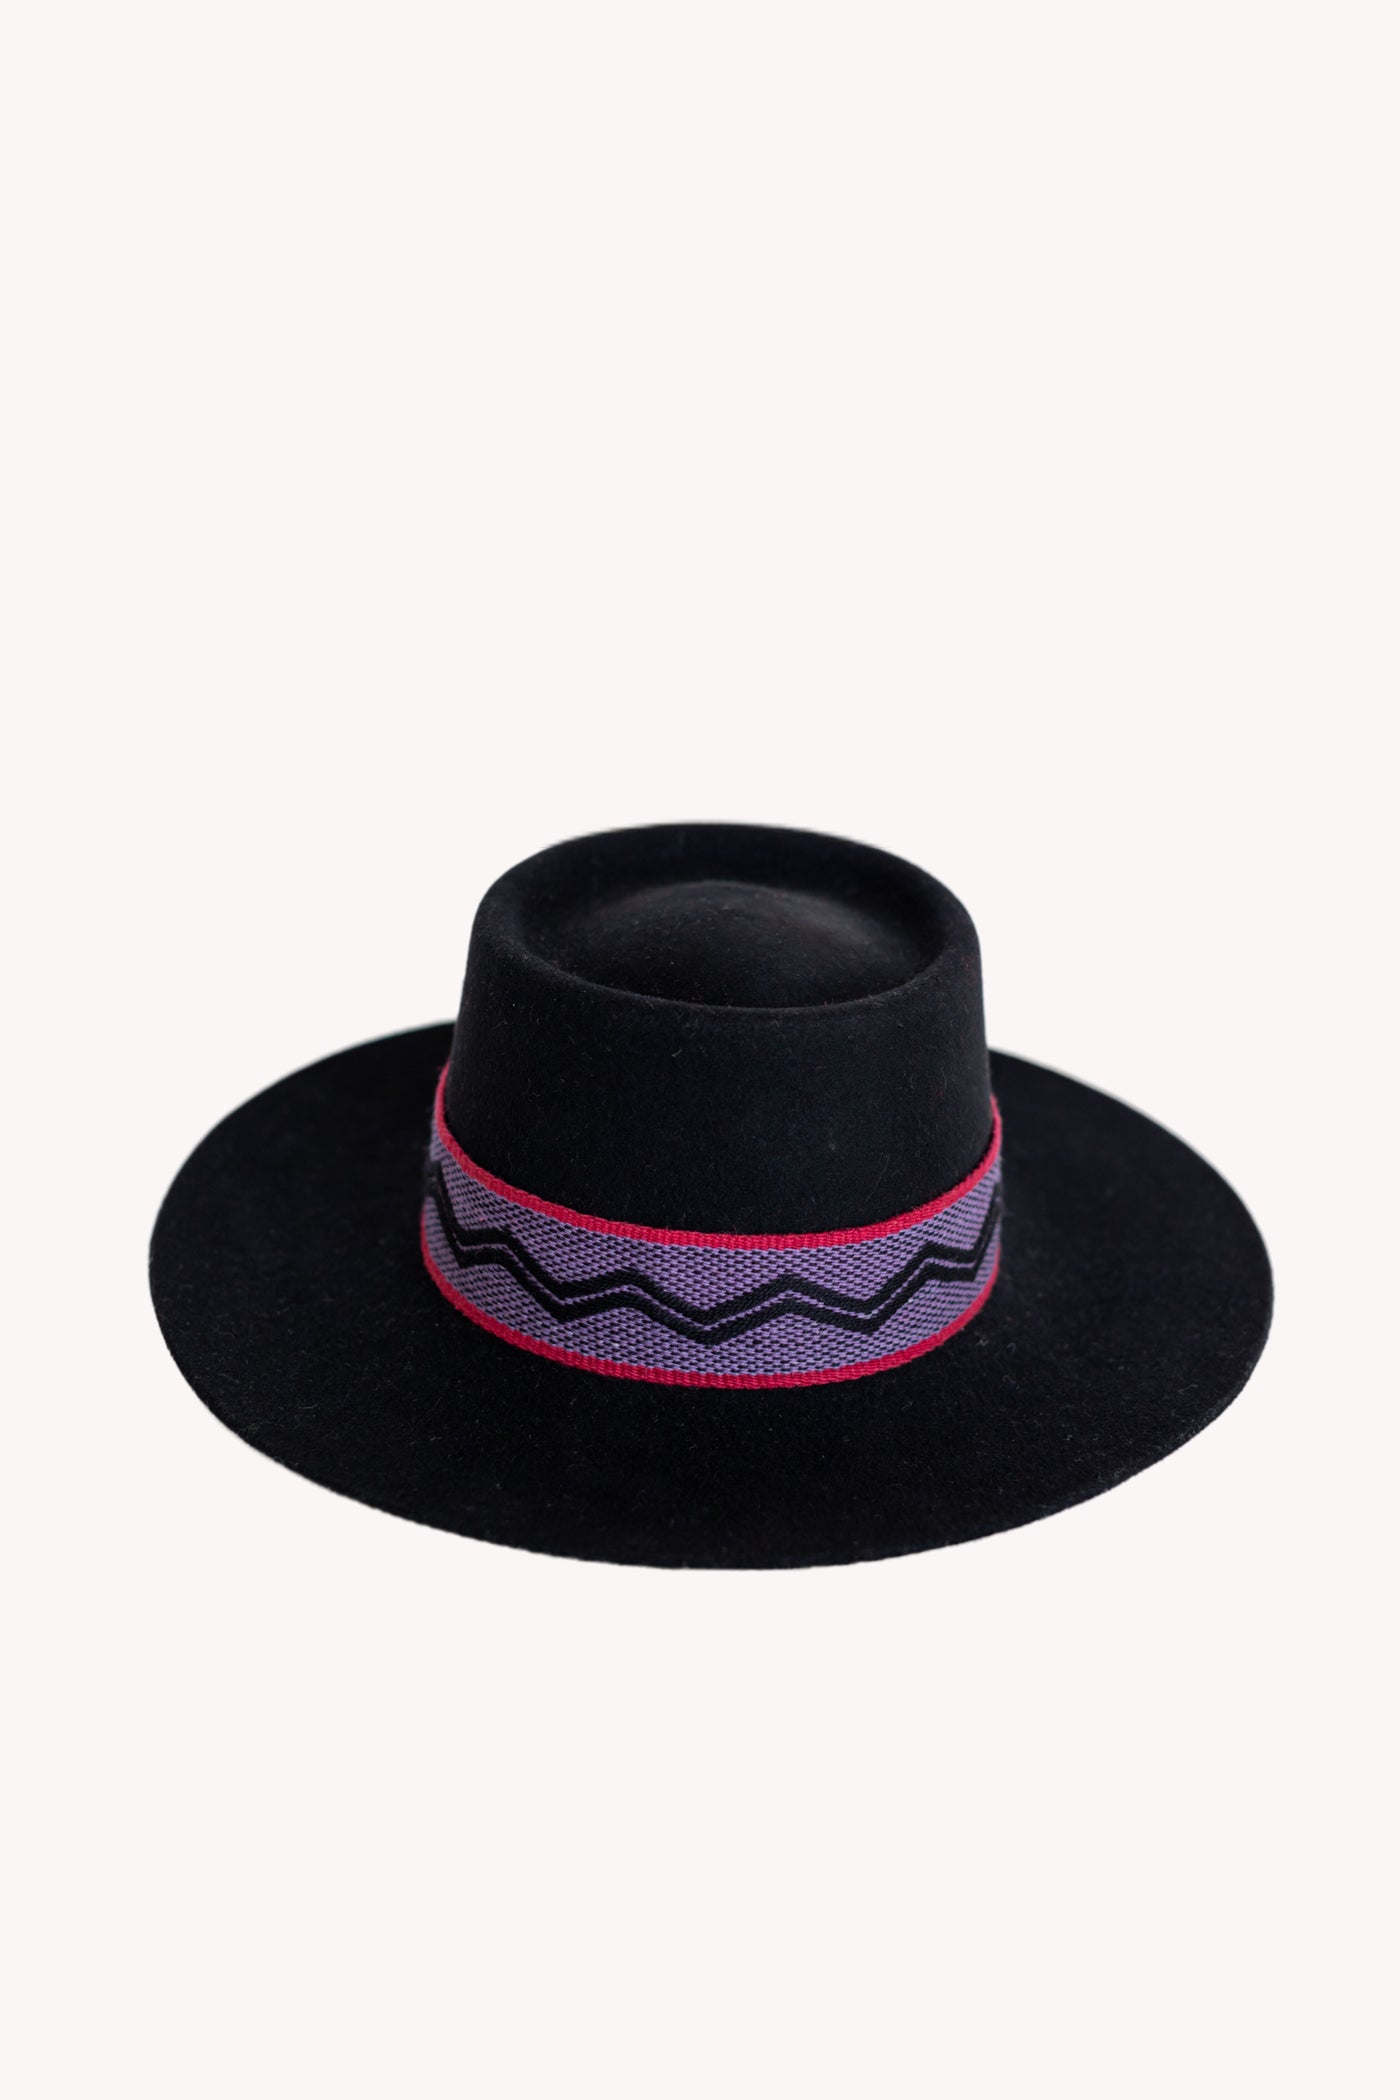 Black Bucket Hat with Purpose Intention Band Removable Intention Hat Textile Band